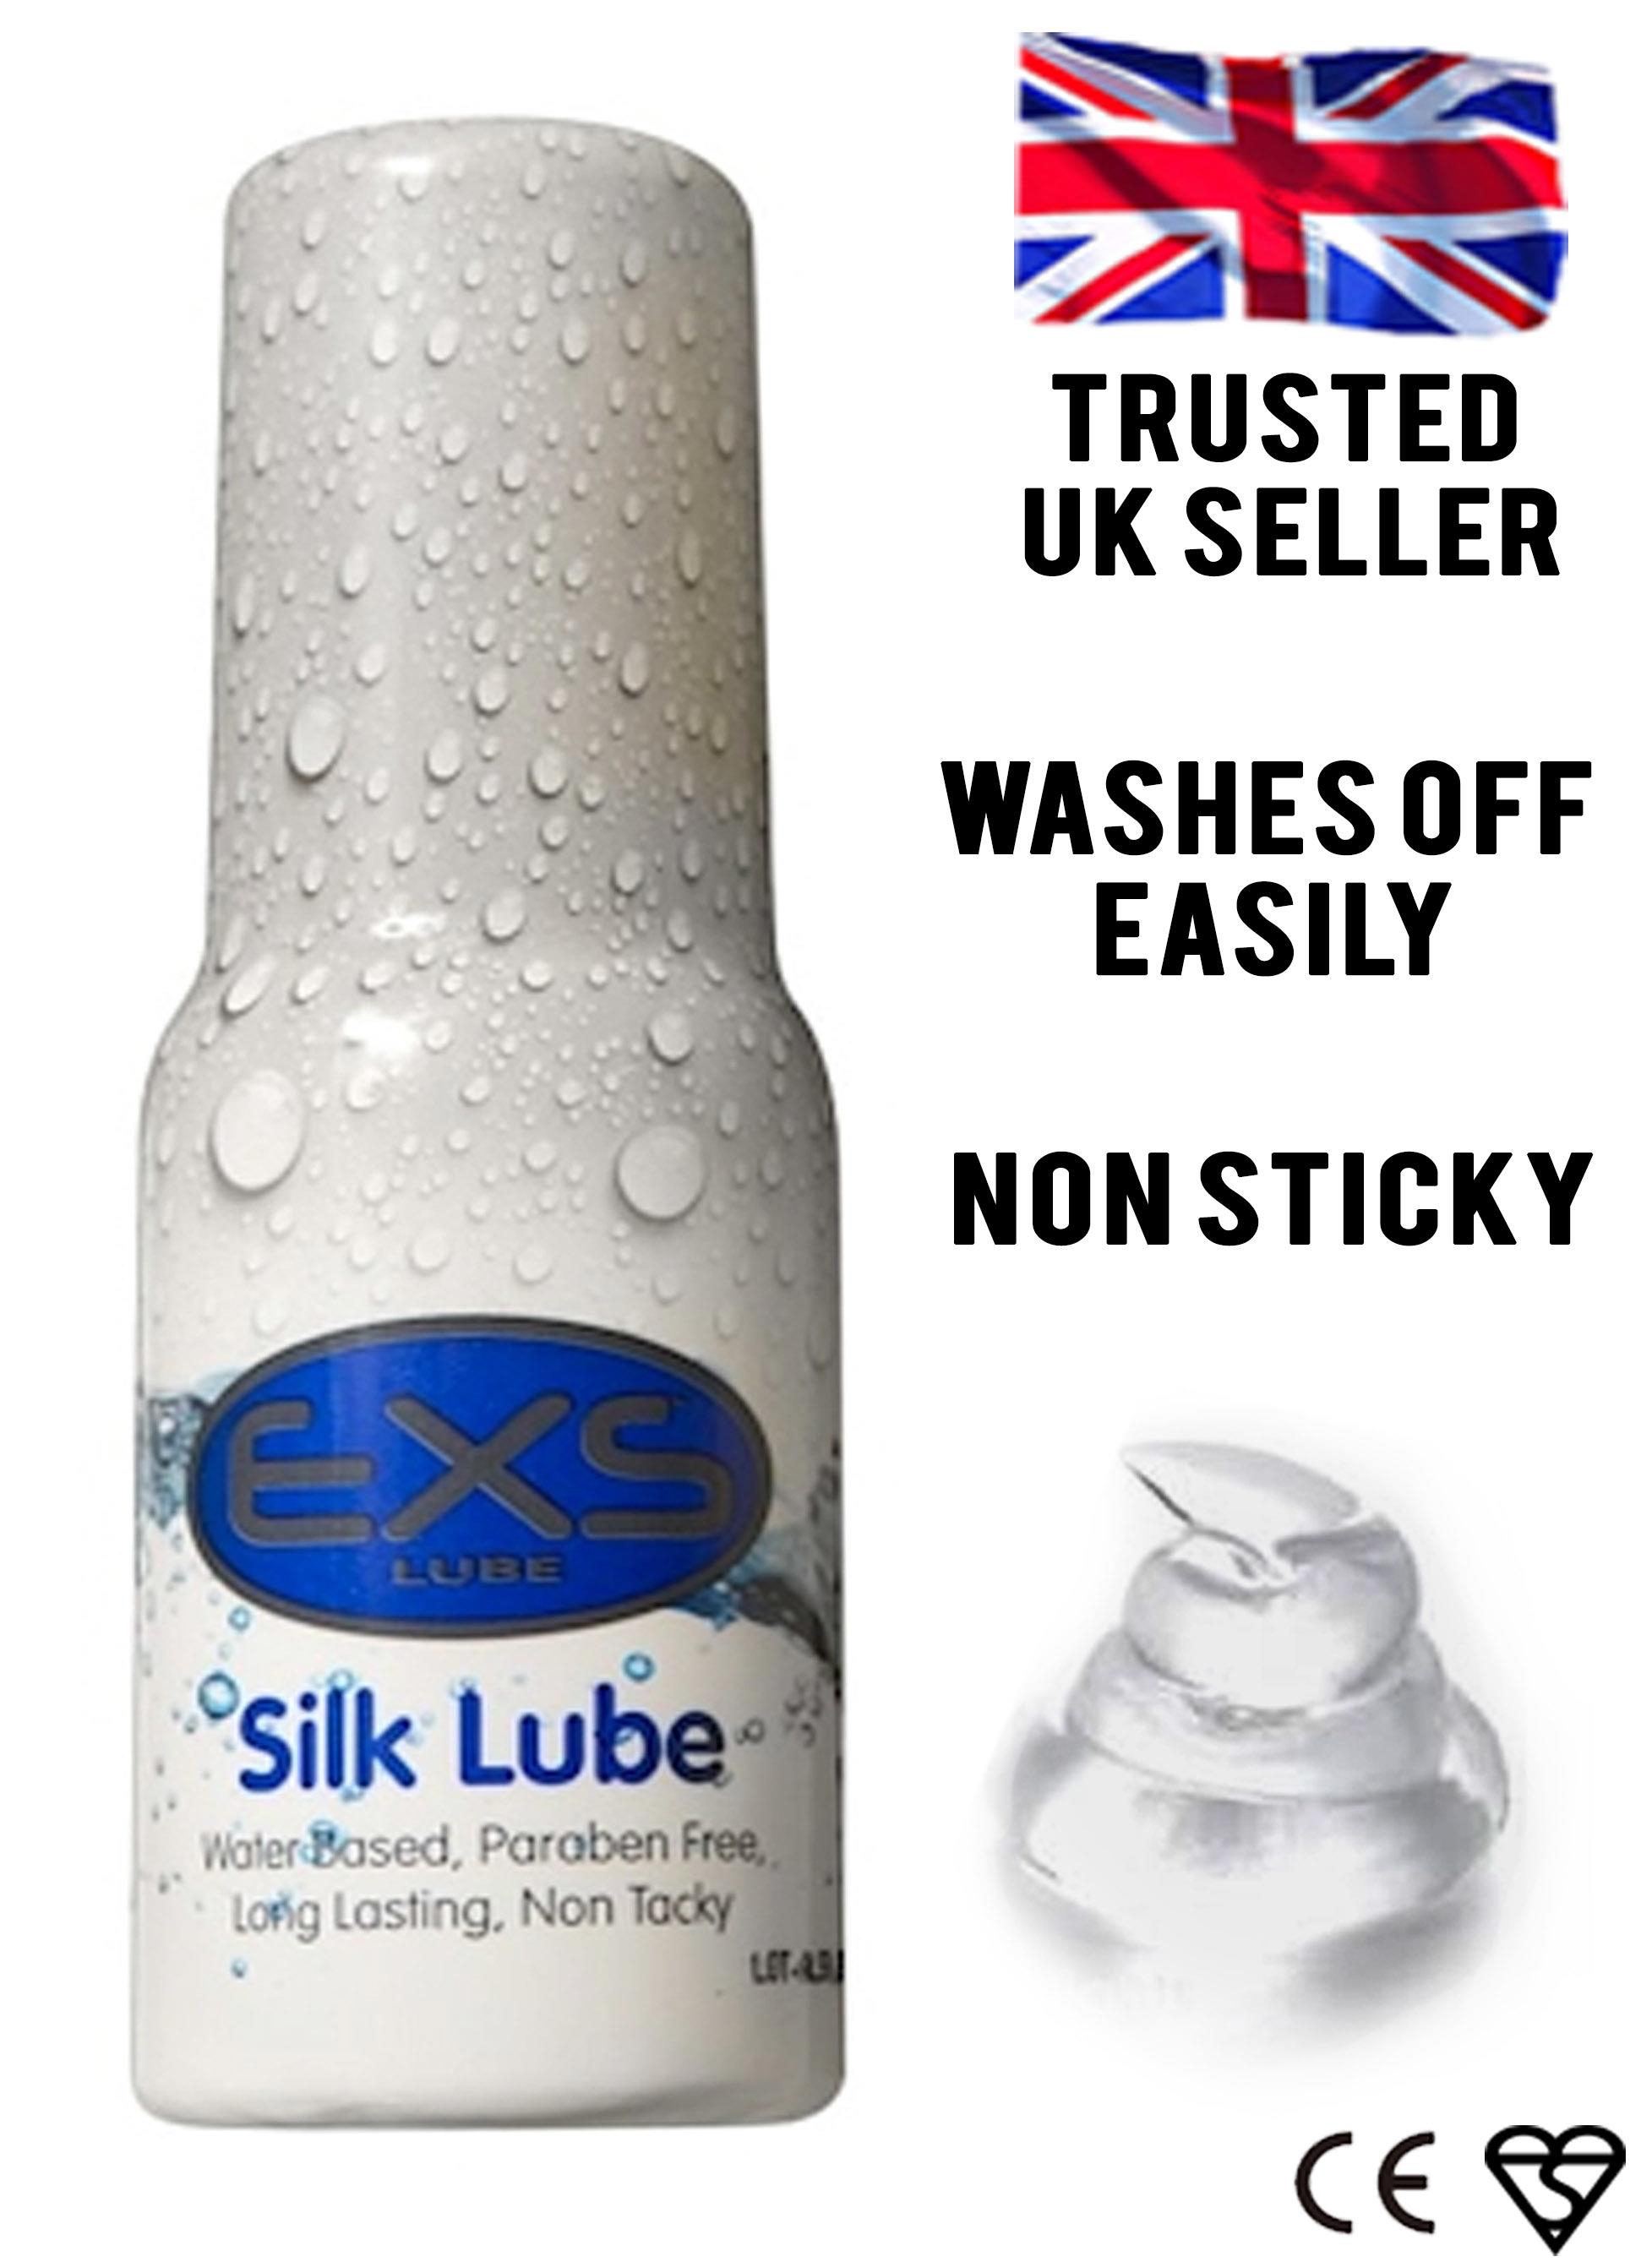 EXS Silk Lube Bottle 50ml with information